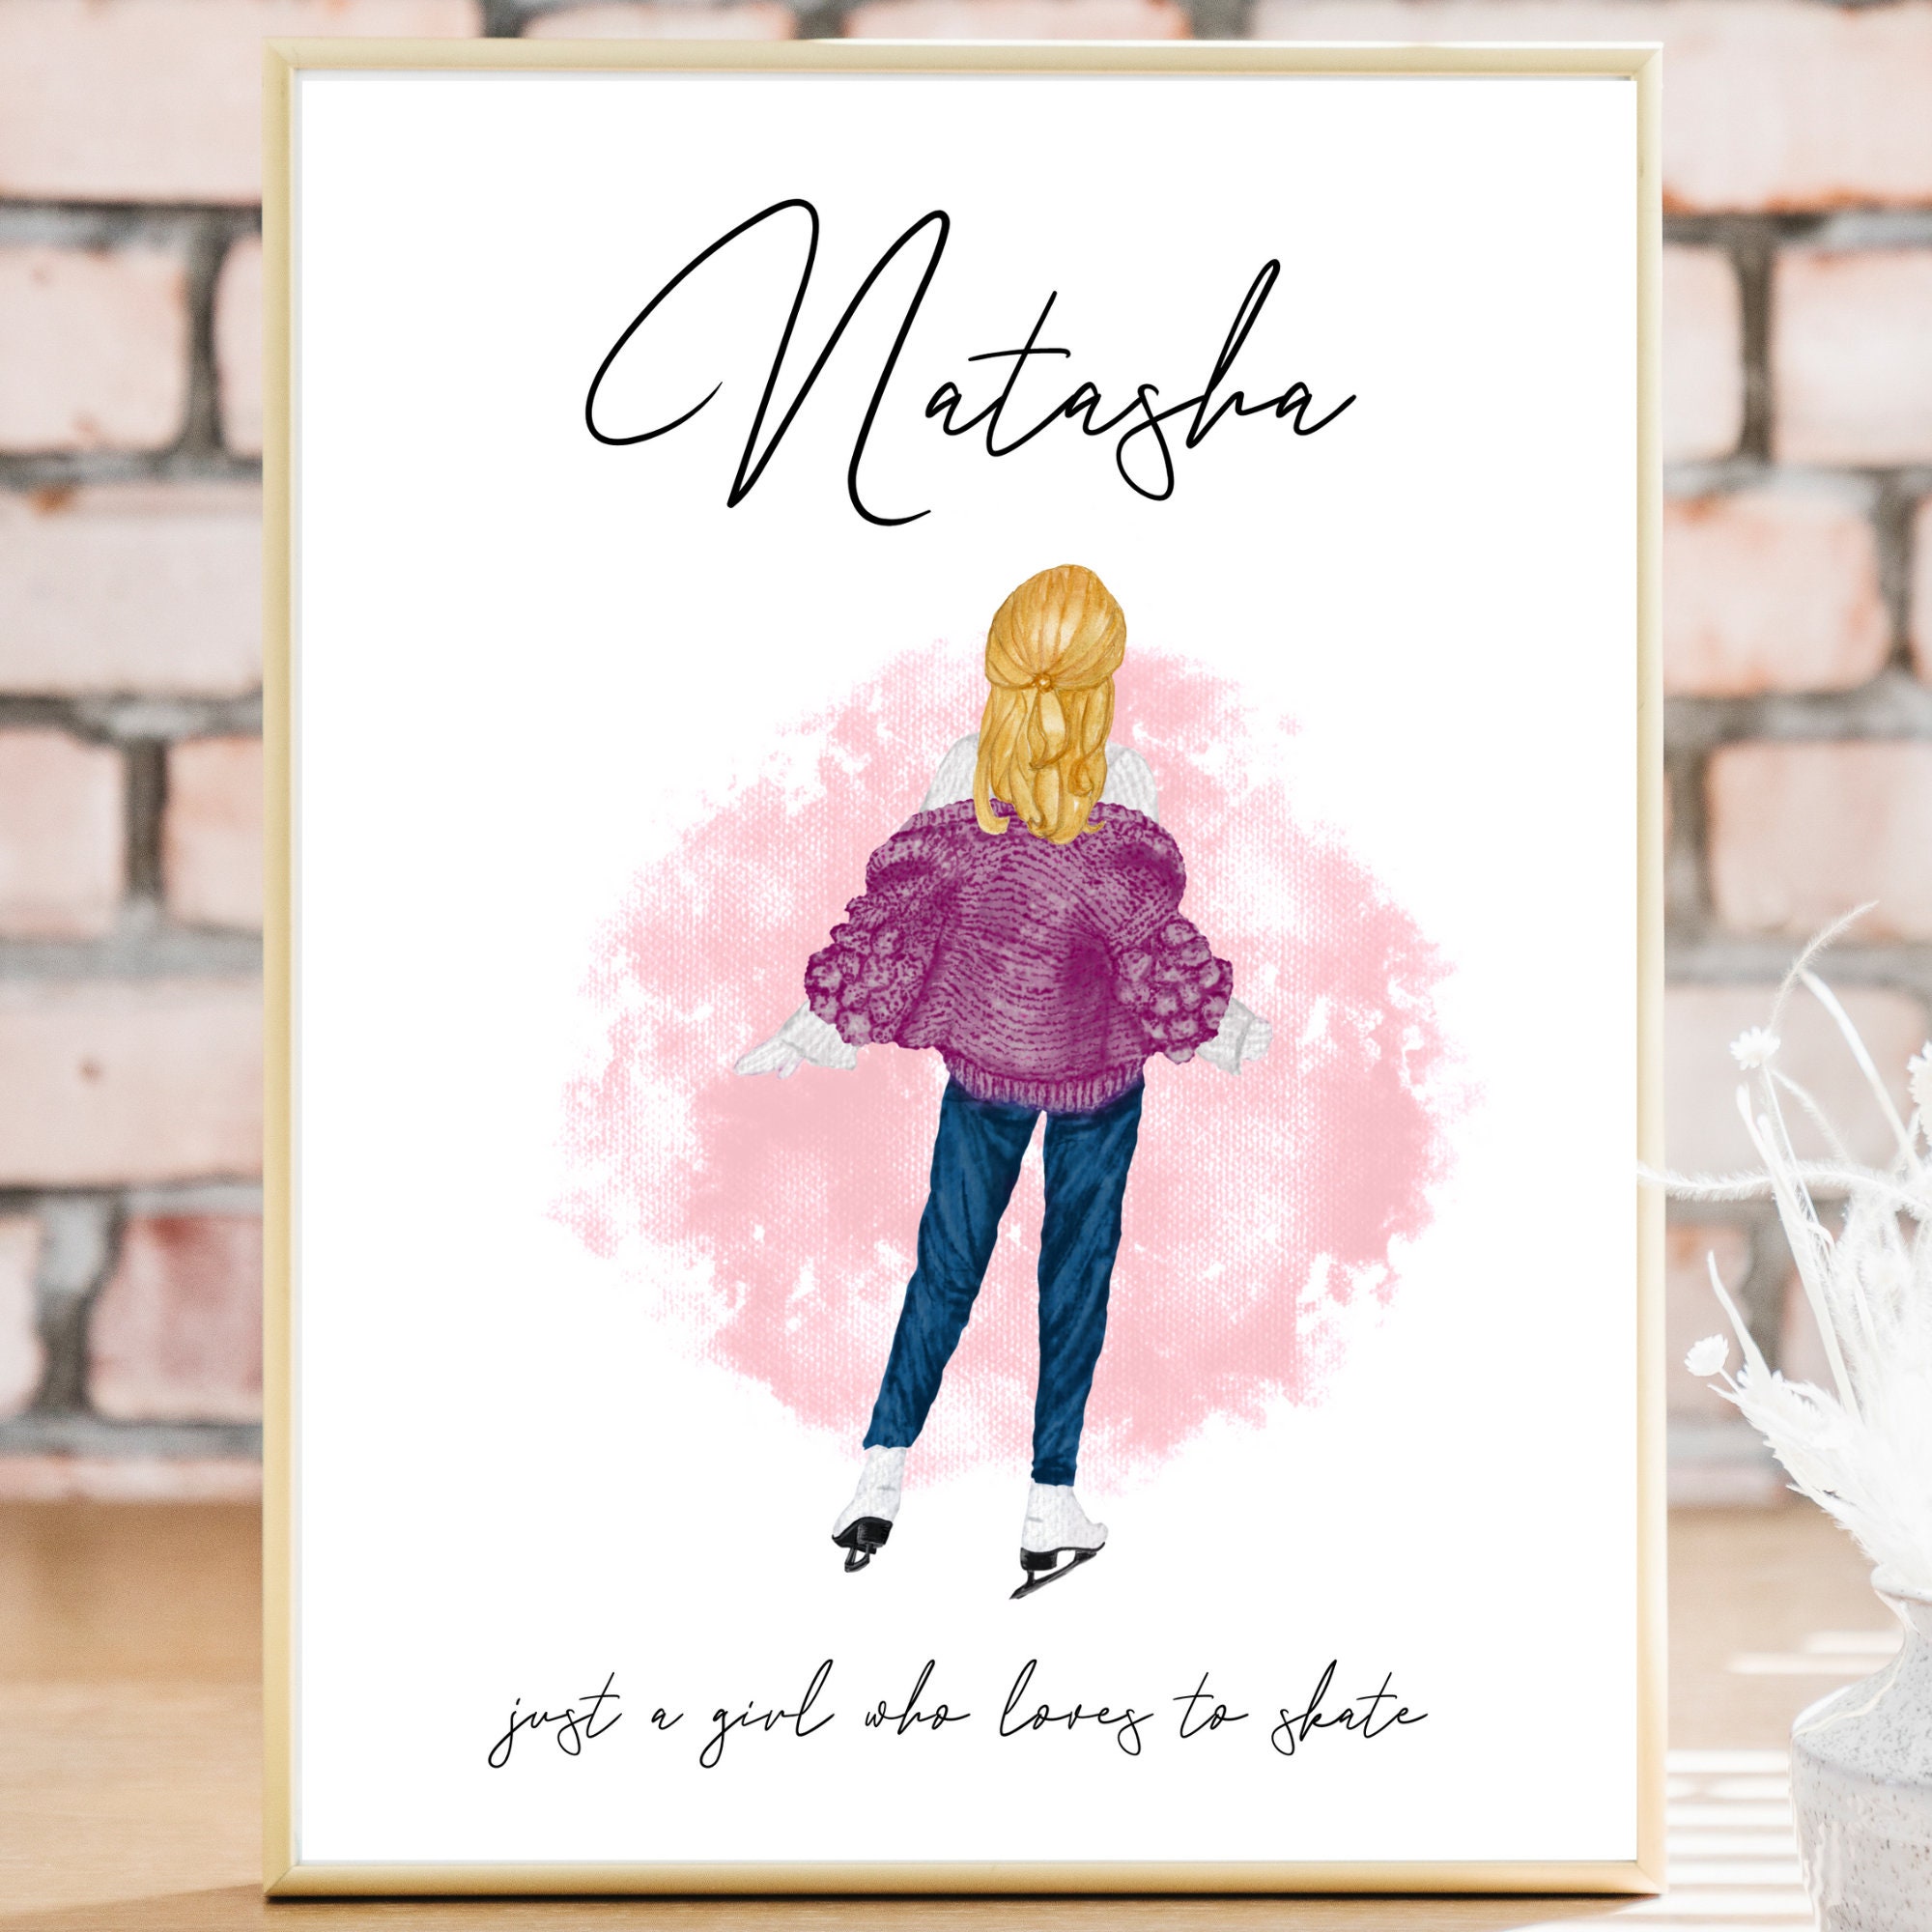 Personalized Ice Skating Poster, Ice Skating Gift, Figure Skating Gift,  Teen Girl Gift, Gifts for Her, Watercolor People, Printable Wall Art 